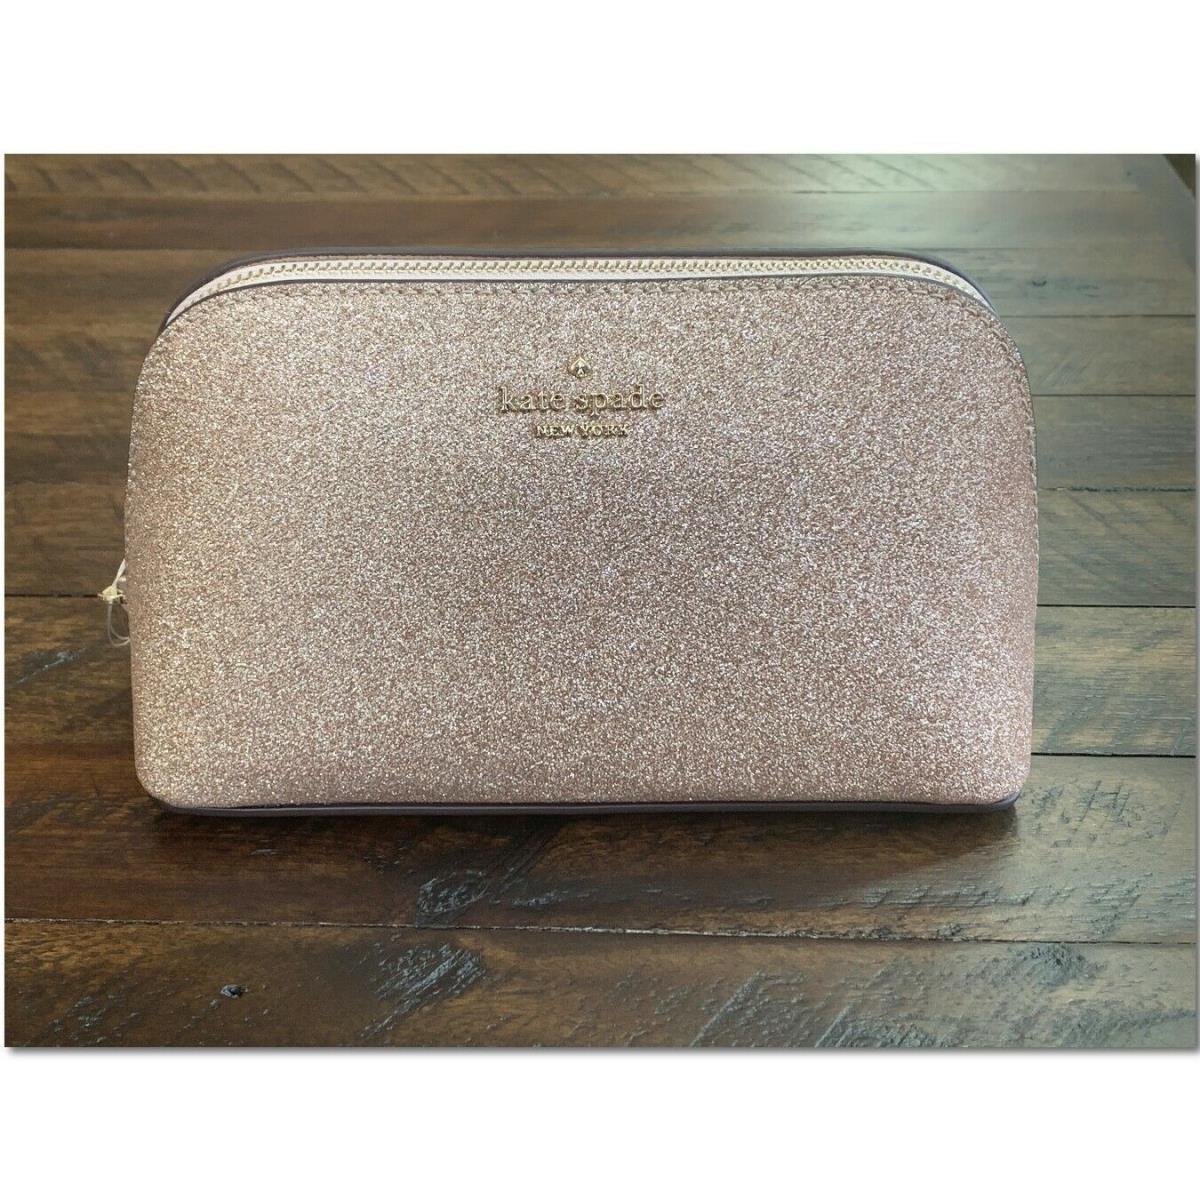 Kate Spade Shimmy Glitter Rose Gold Small Cosmetic Case Travel Make Up Case